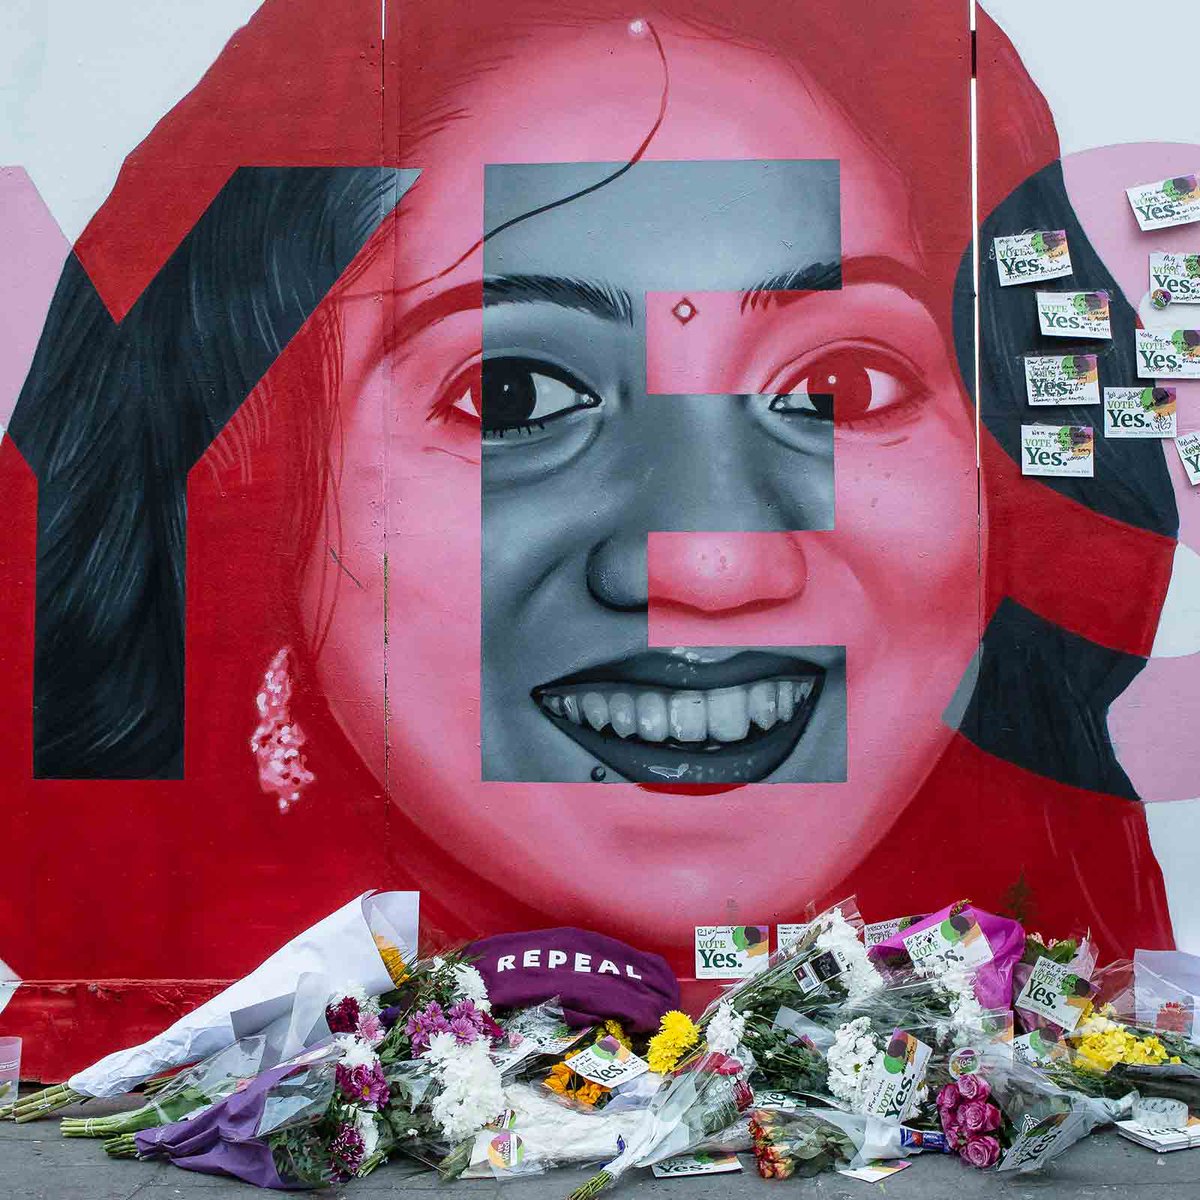 RIP Savita. 10 years. A tragic loss of life whose legacy will be felt for generations.